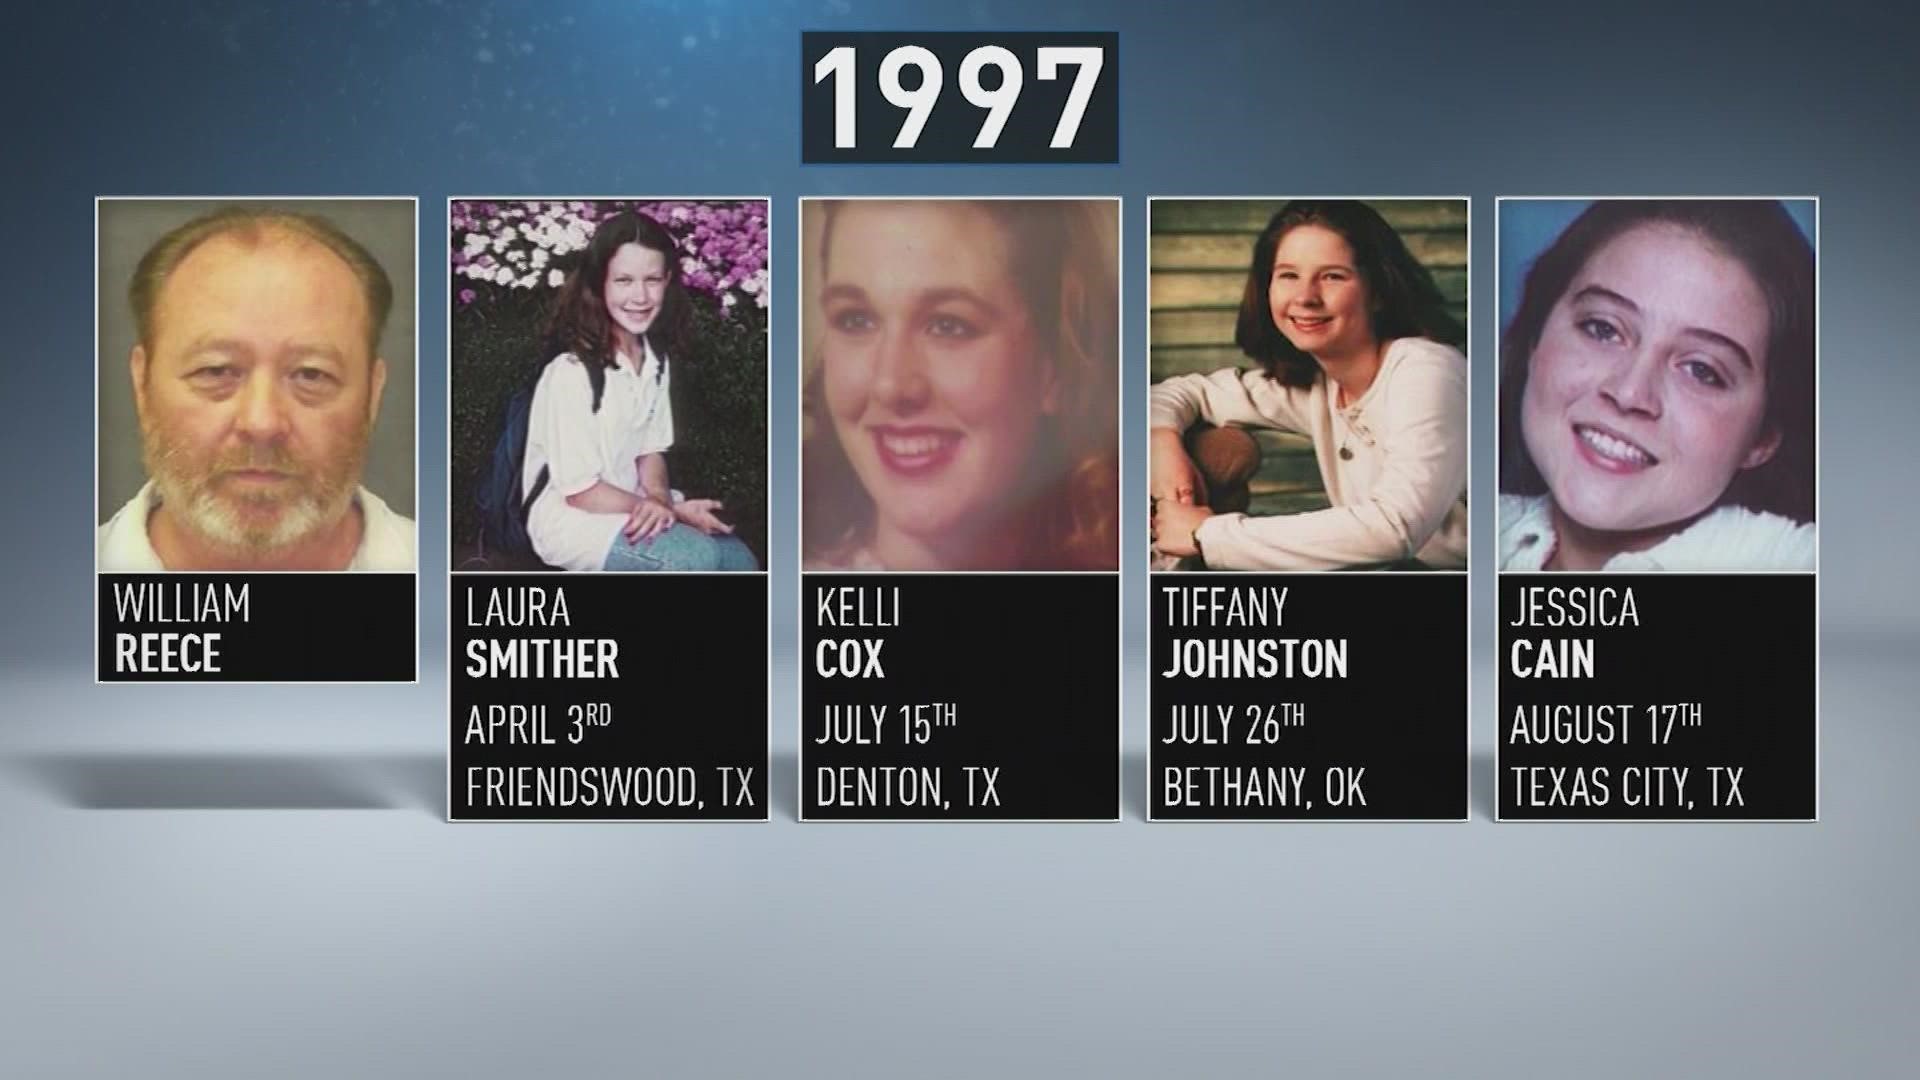 Jan Bynum and Gay Smither have waited a long time to see Reece tried in the Lone Star State for the 1997 murders of their daughters,  Kelli Cox & Laura Smither.